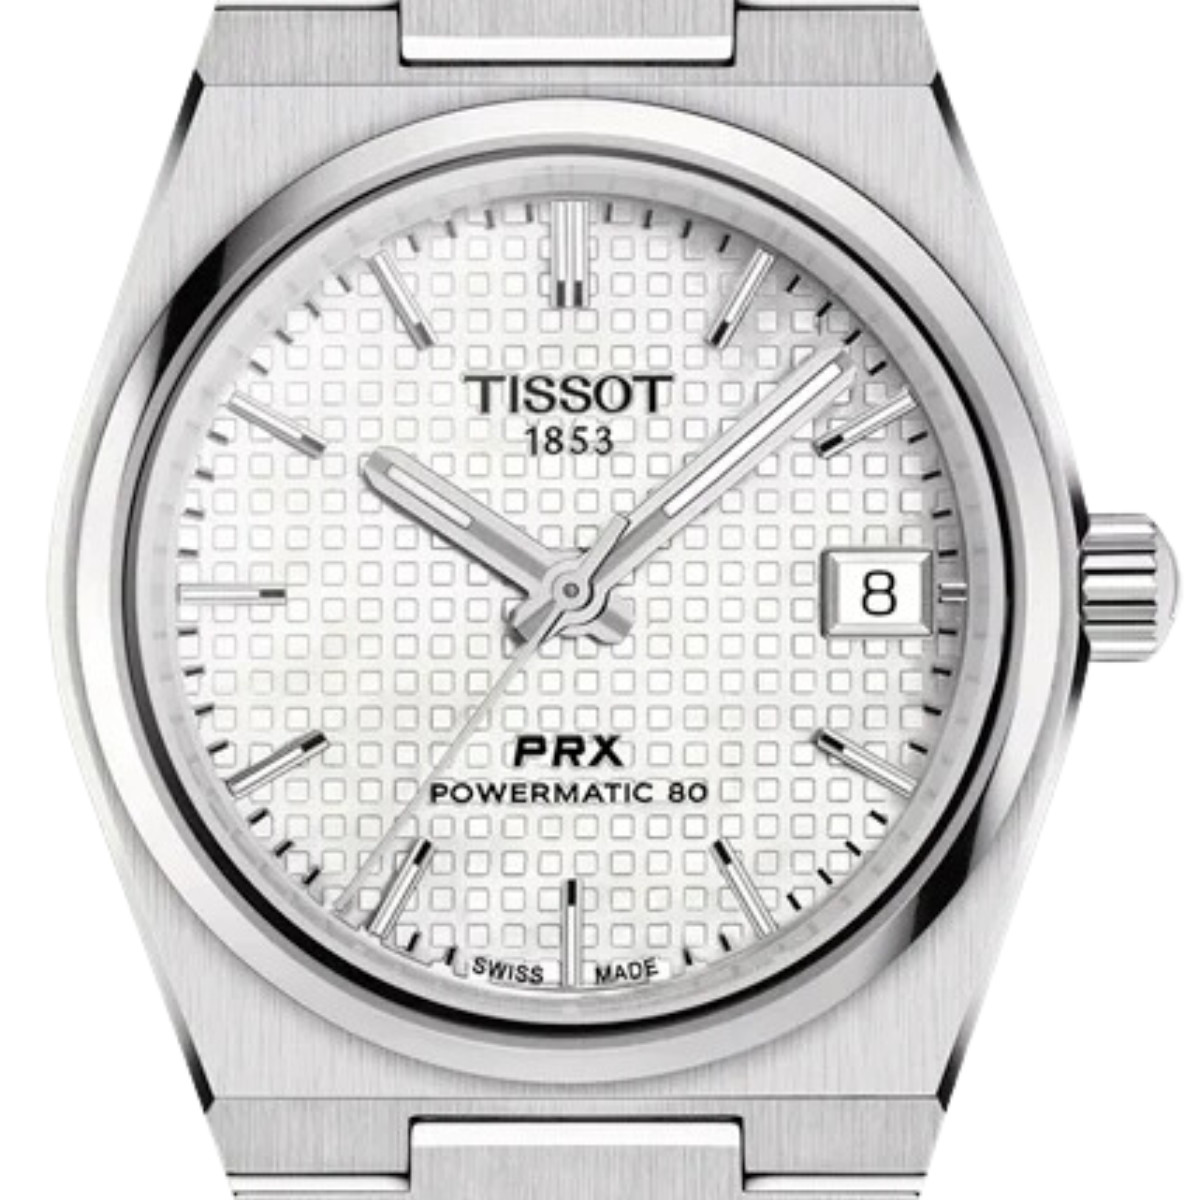 Tissot PRX Automatic Unisex T137.207.11.111.00 T1372071111100 White MOP Dial Watch - Skywatches